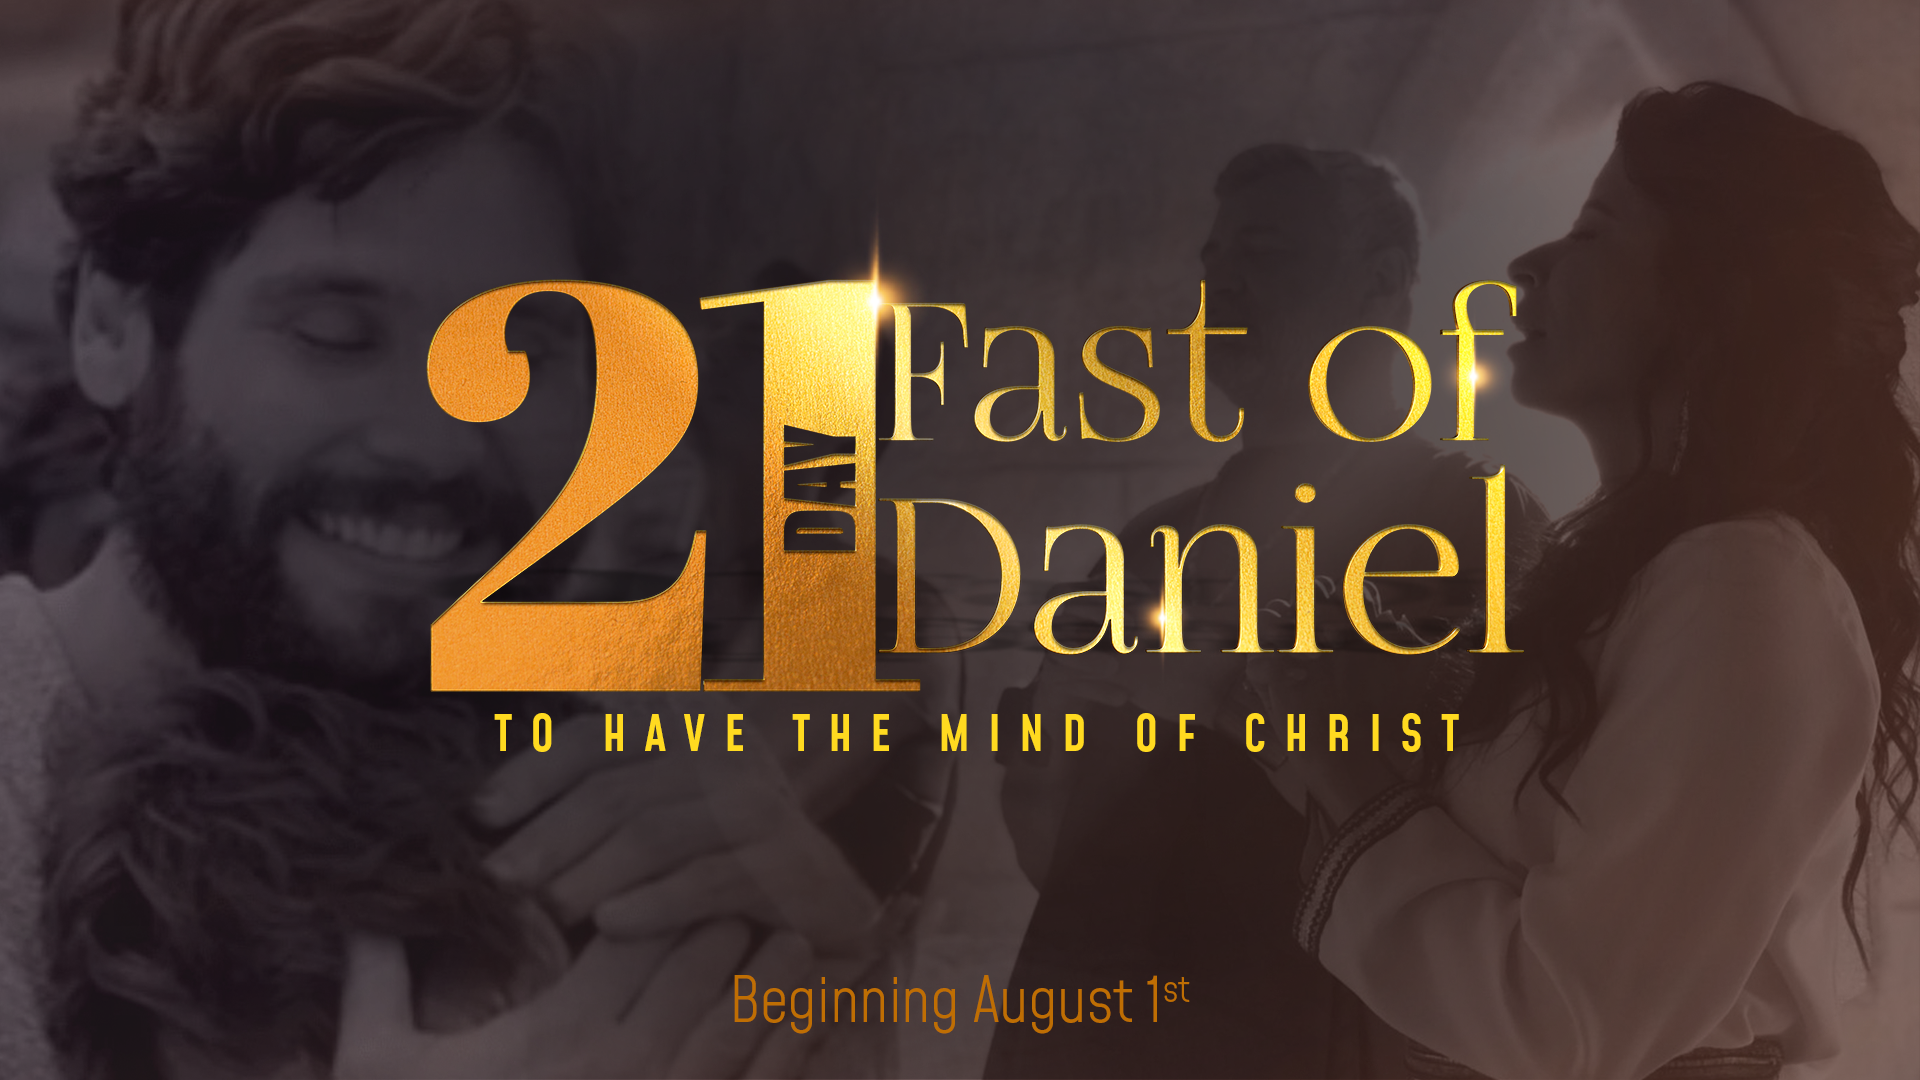 Fast of Daniel: 21 Days To Have the Mind of Christ